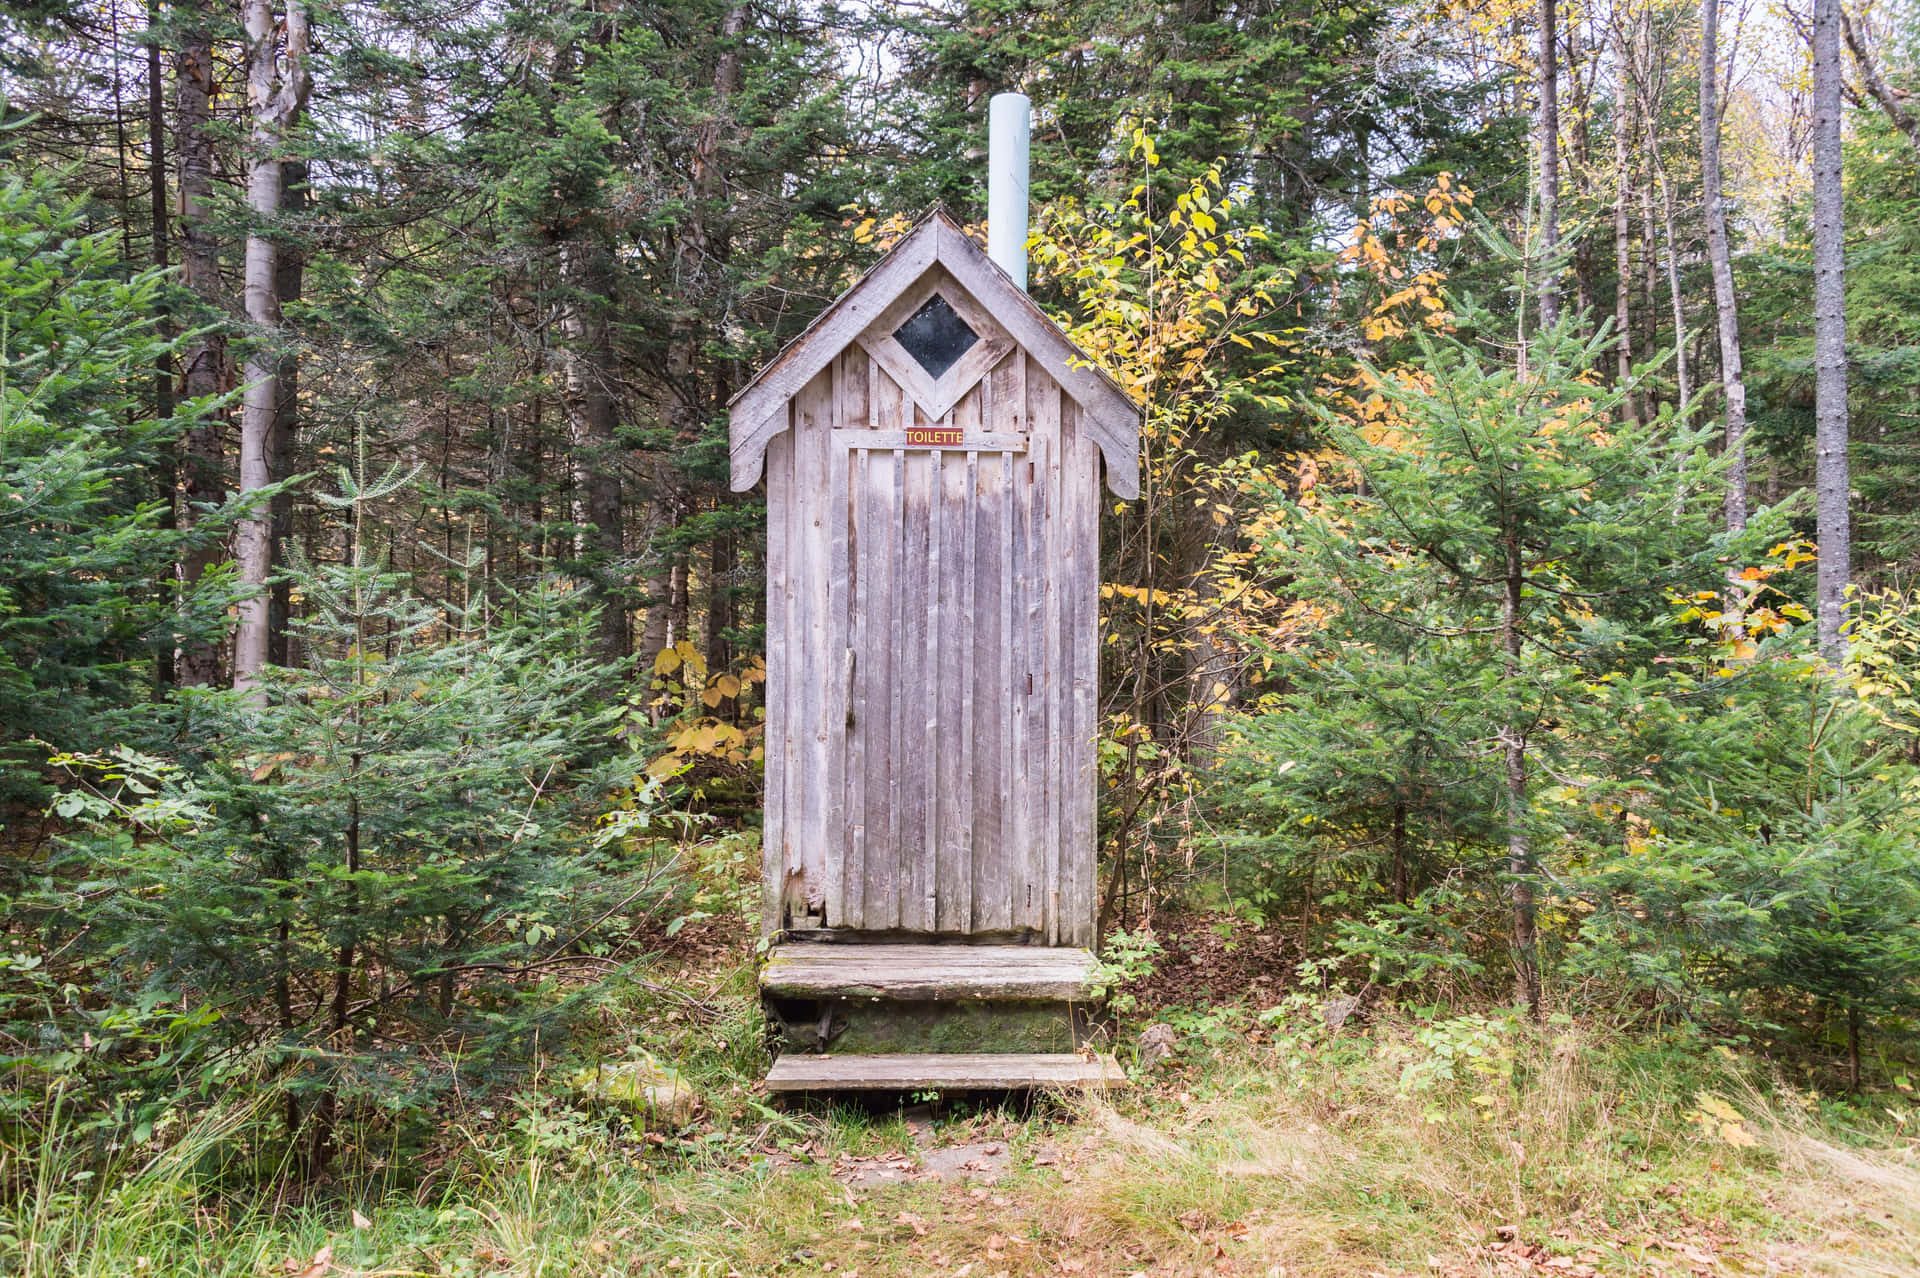 A Wooden Outhouse In The Woods